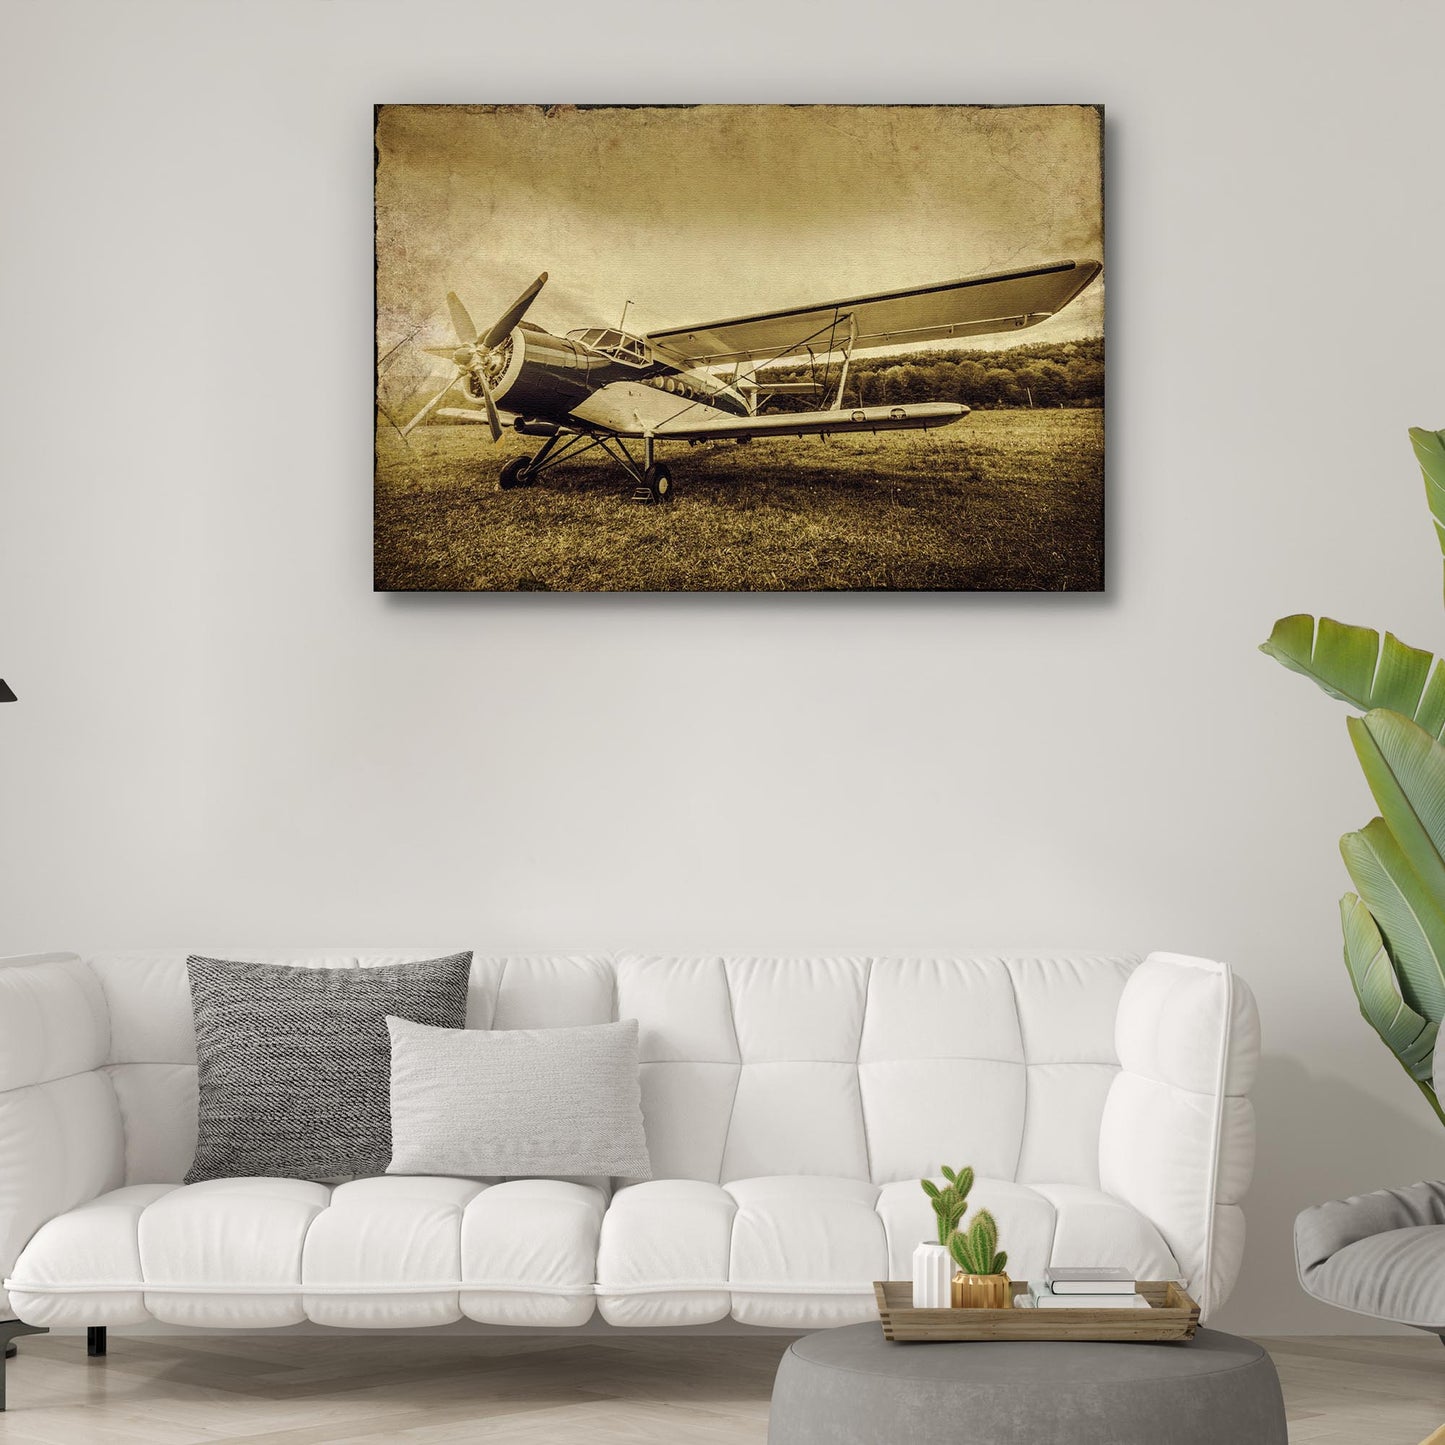 Vintage Airplane Grunge Canvas Wall Art - Image by Tailored Canvases